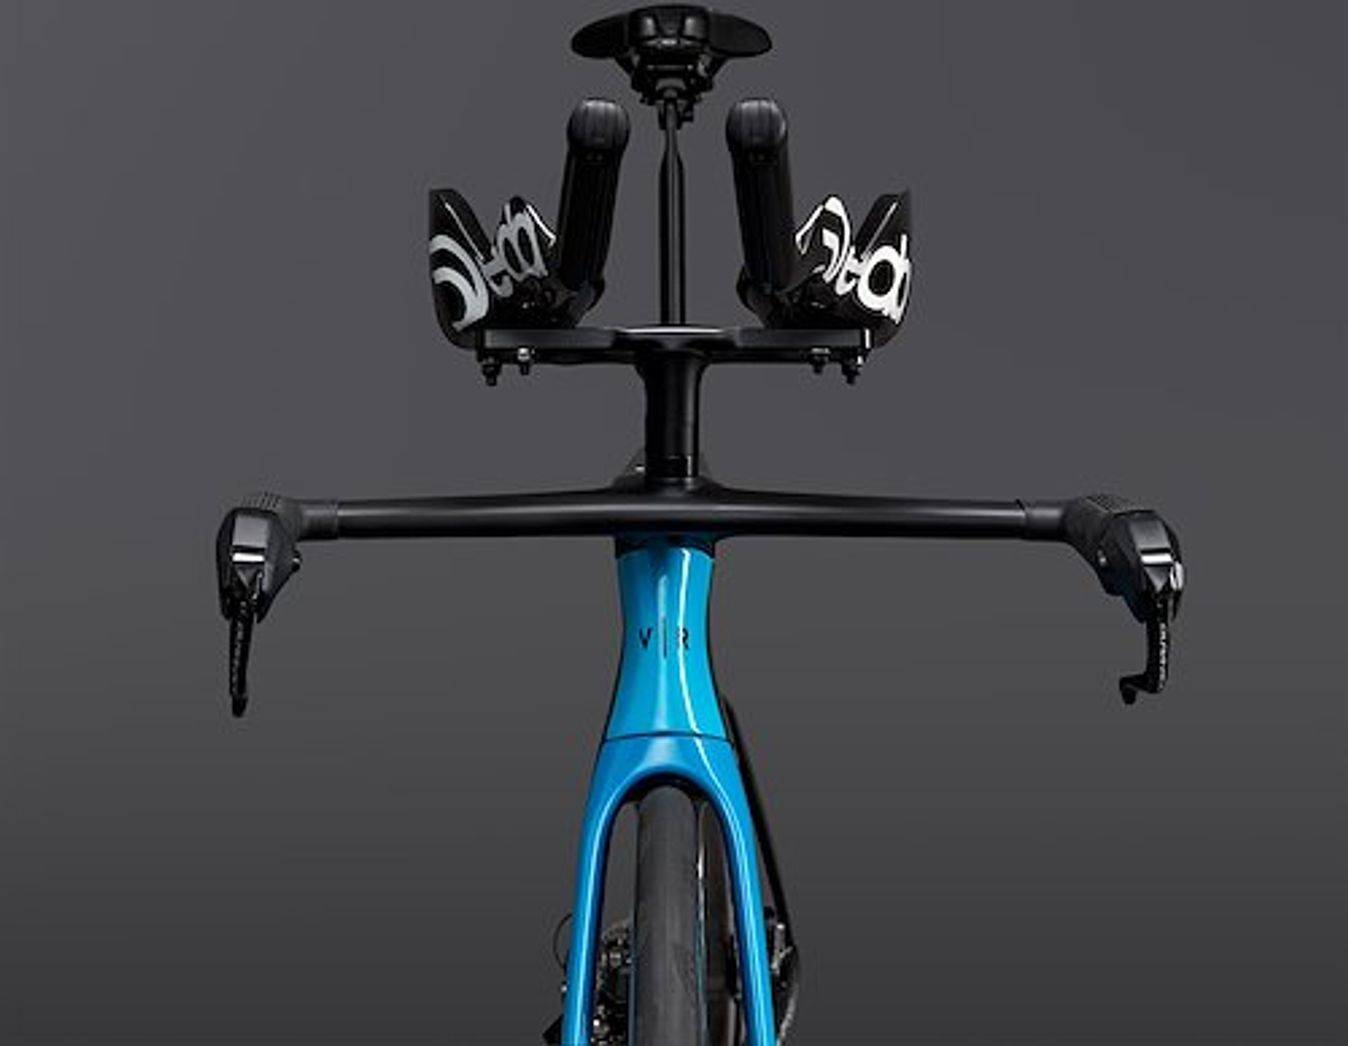 The new time trial bike has been developed with Formula One know-how